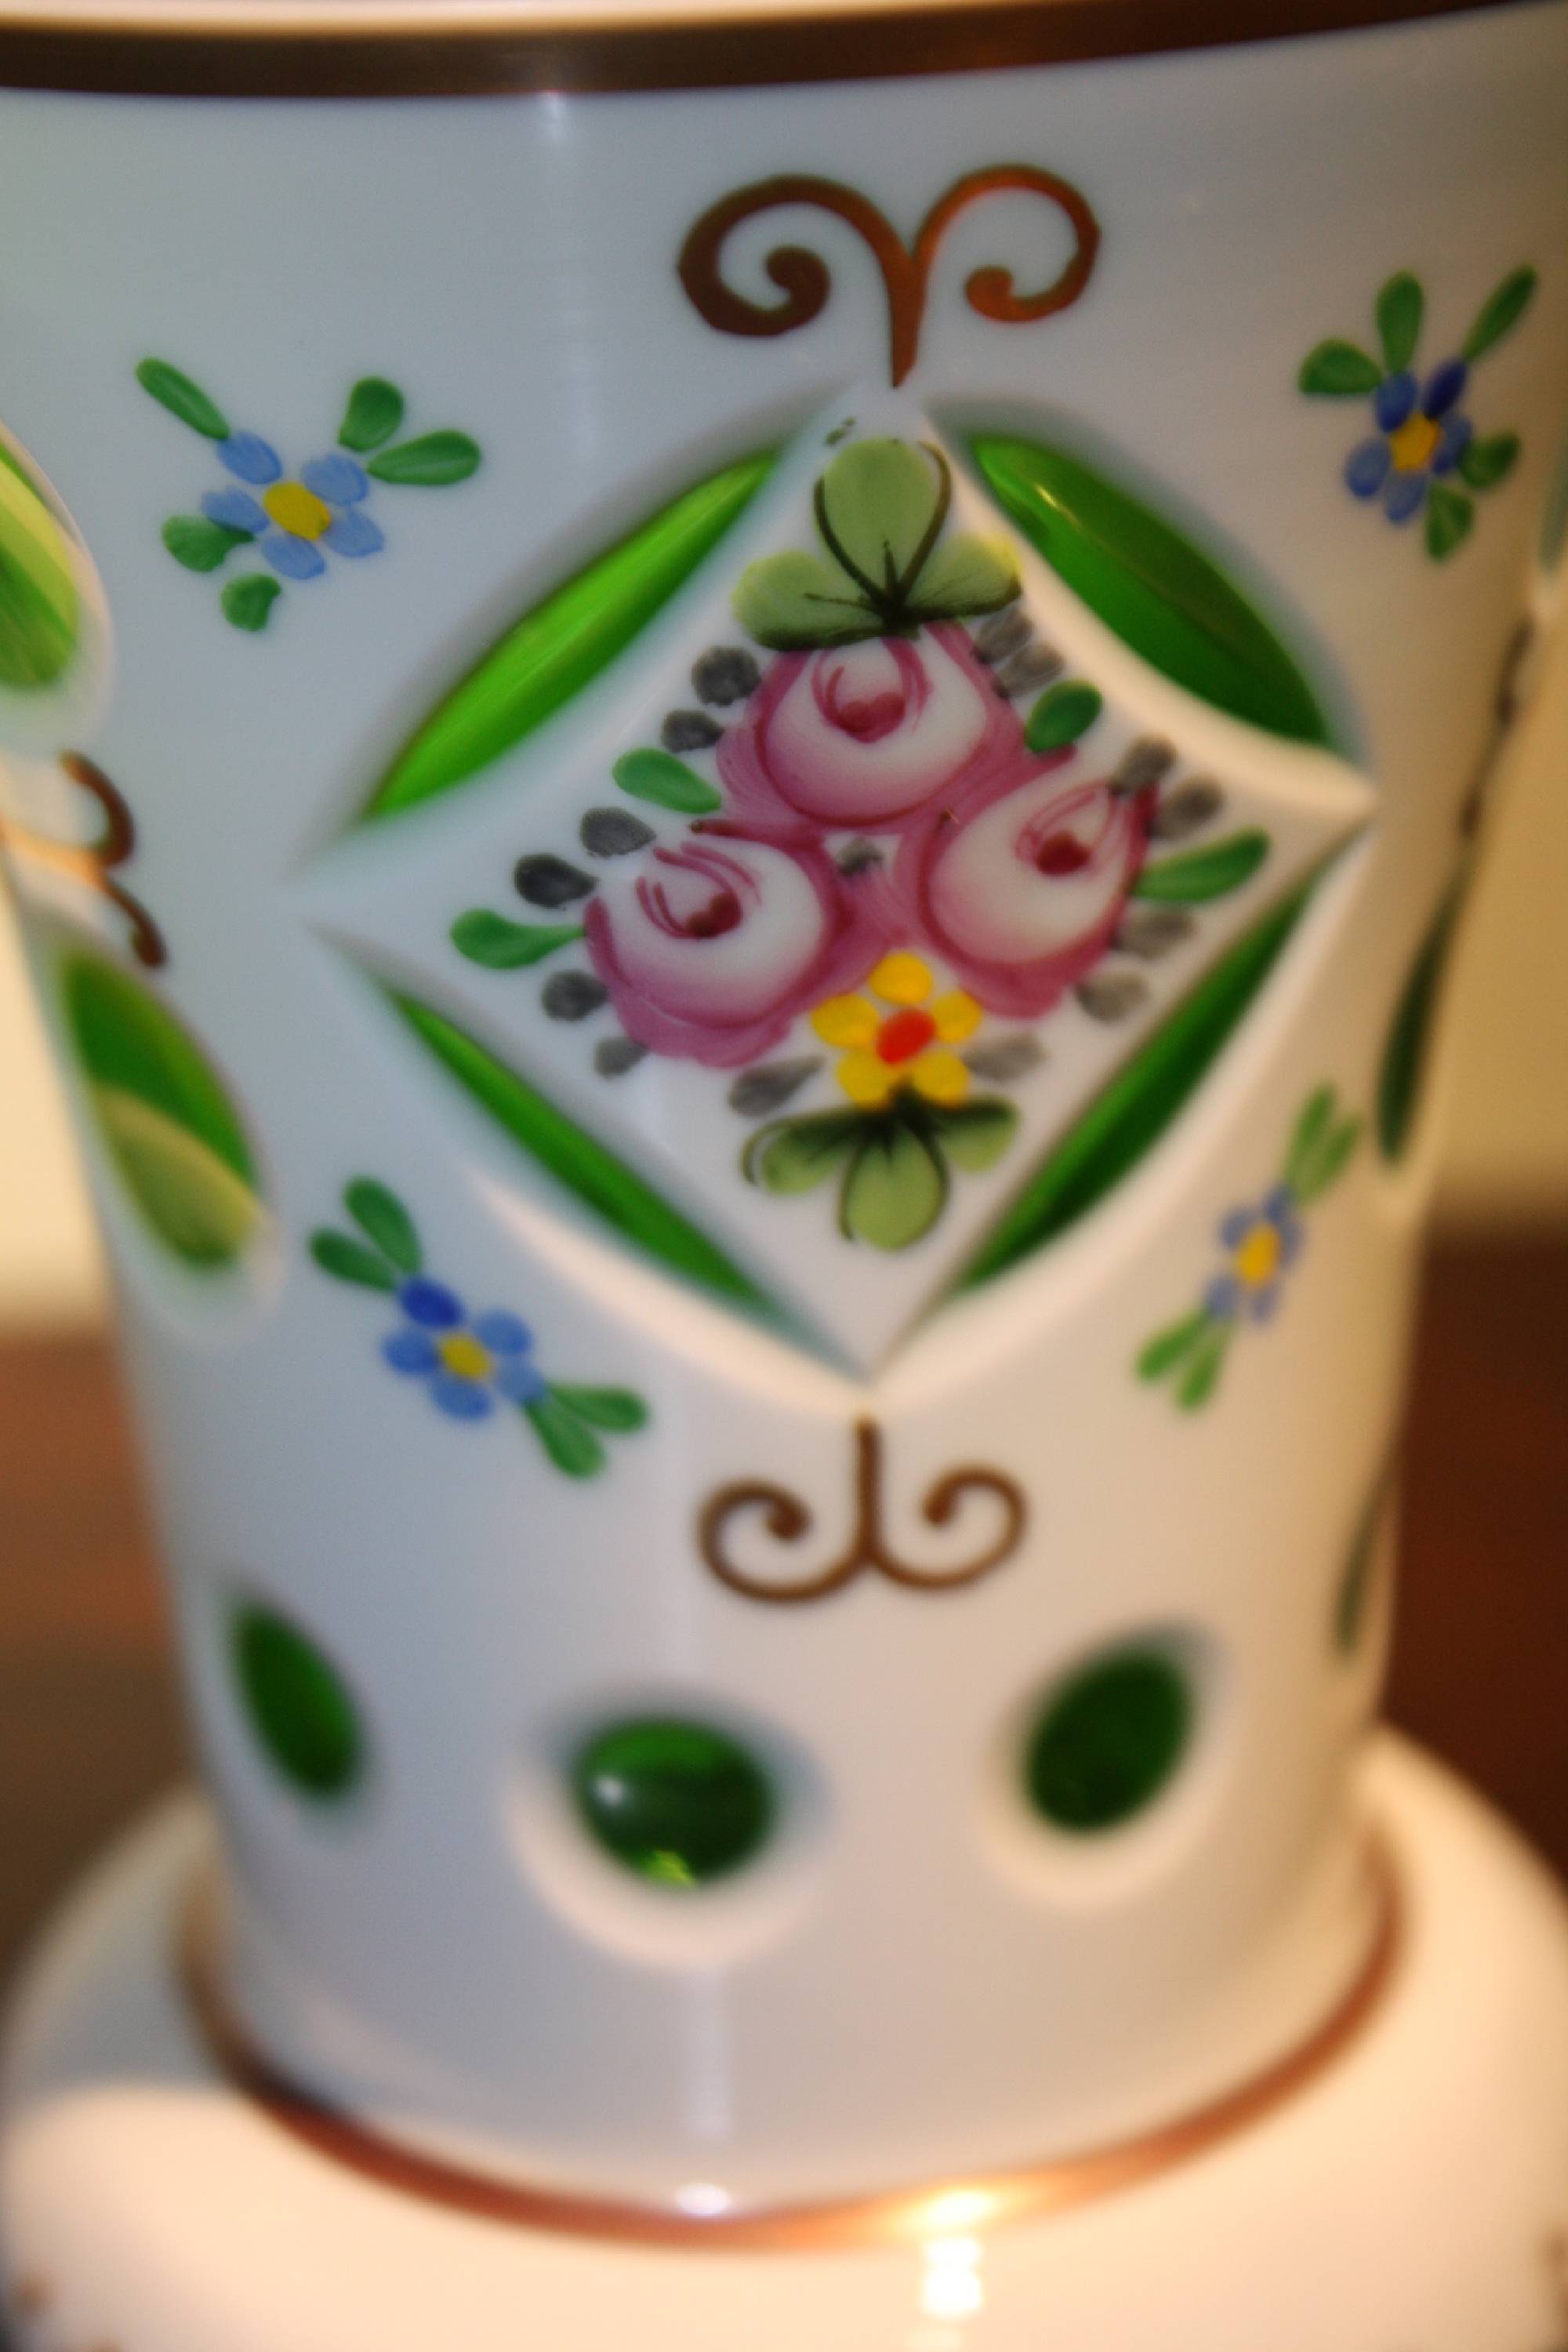 A cute vintage Bohemian 19th century green glass, white milk glass overlay and painted flowers vase